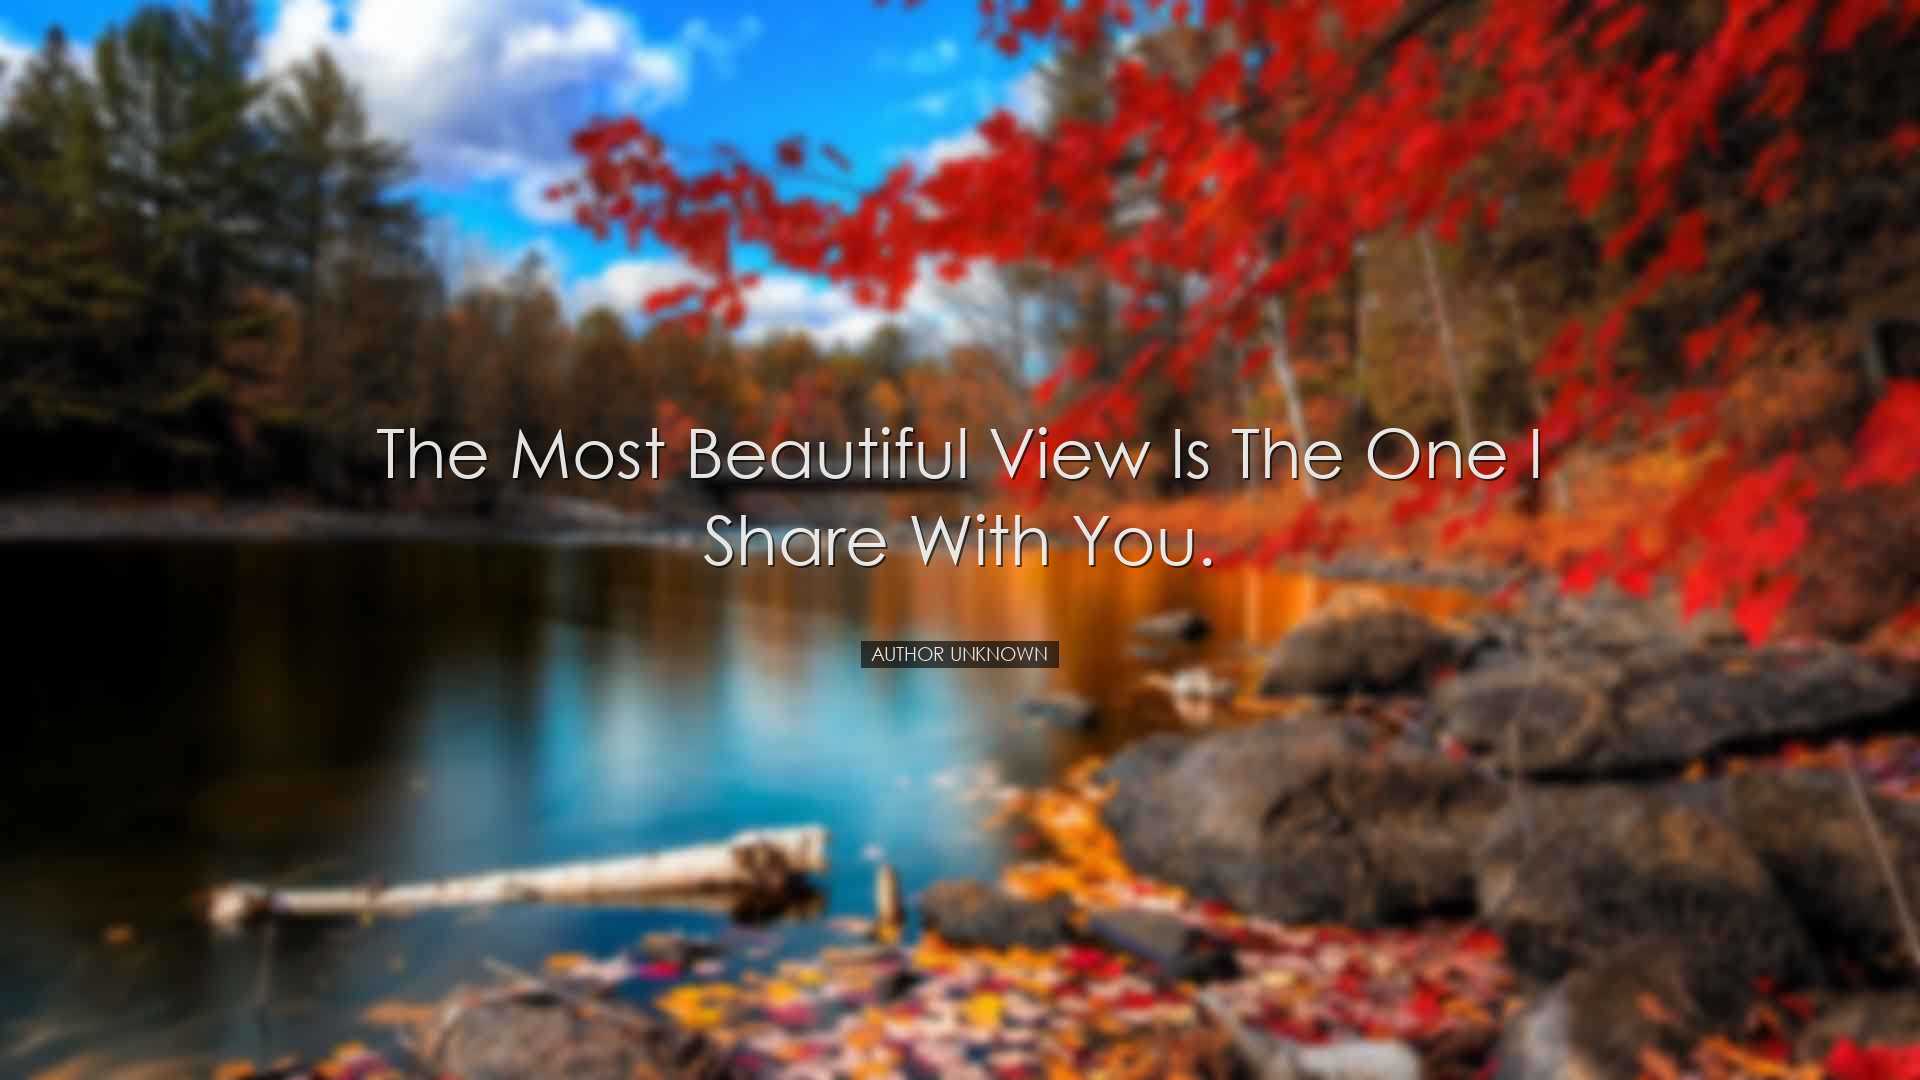 The most beautiful view is the one I share with you. - Author Unkn